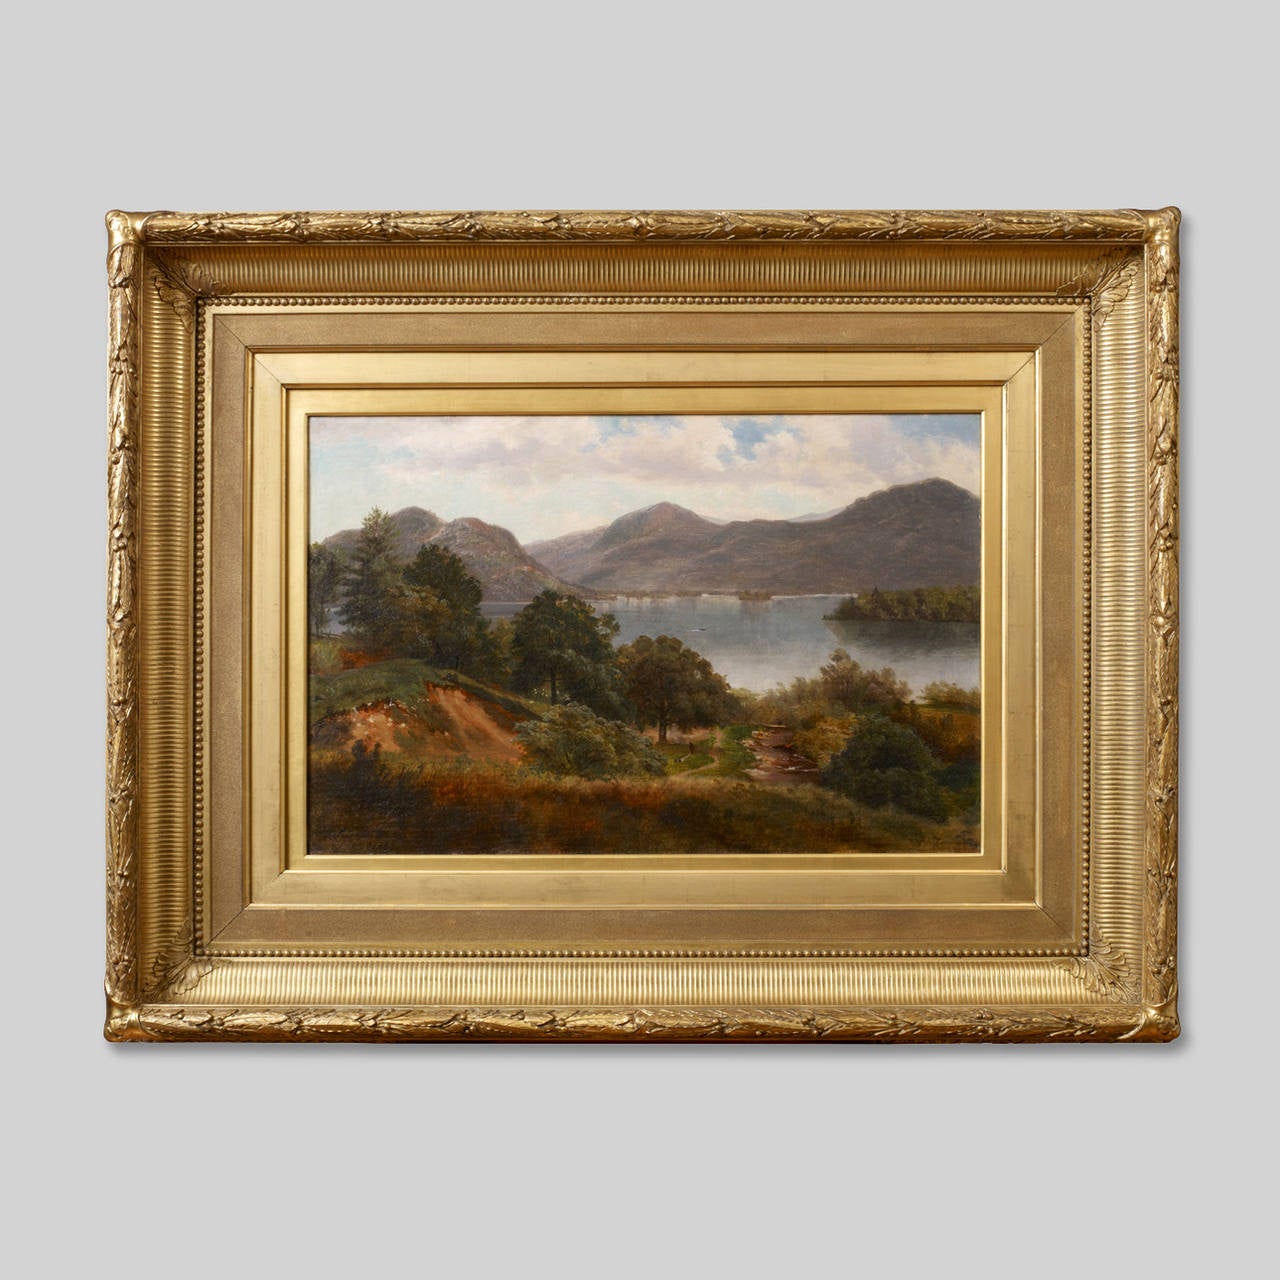 A view of Lake George.
Signed (l.l): A B Durand 1878. Signature abraded, not fully legible.
Oil on canvas.
Measures: 16 ¼